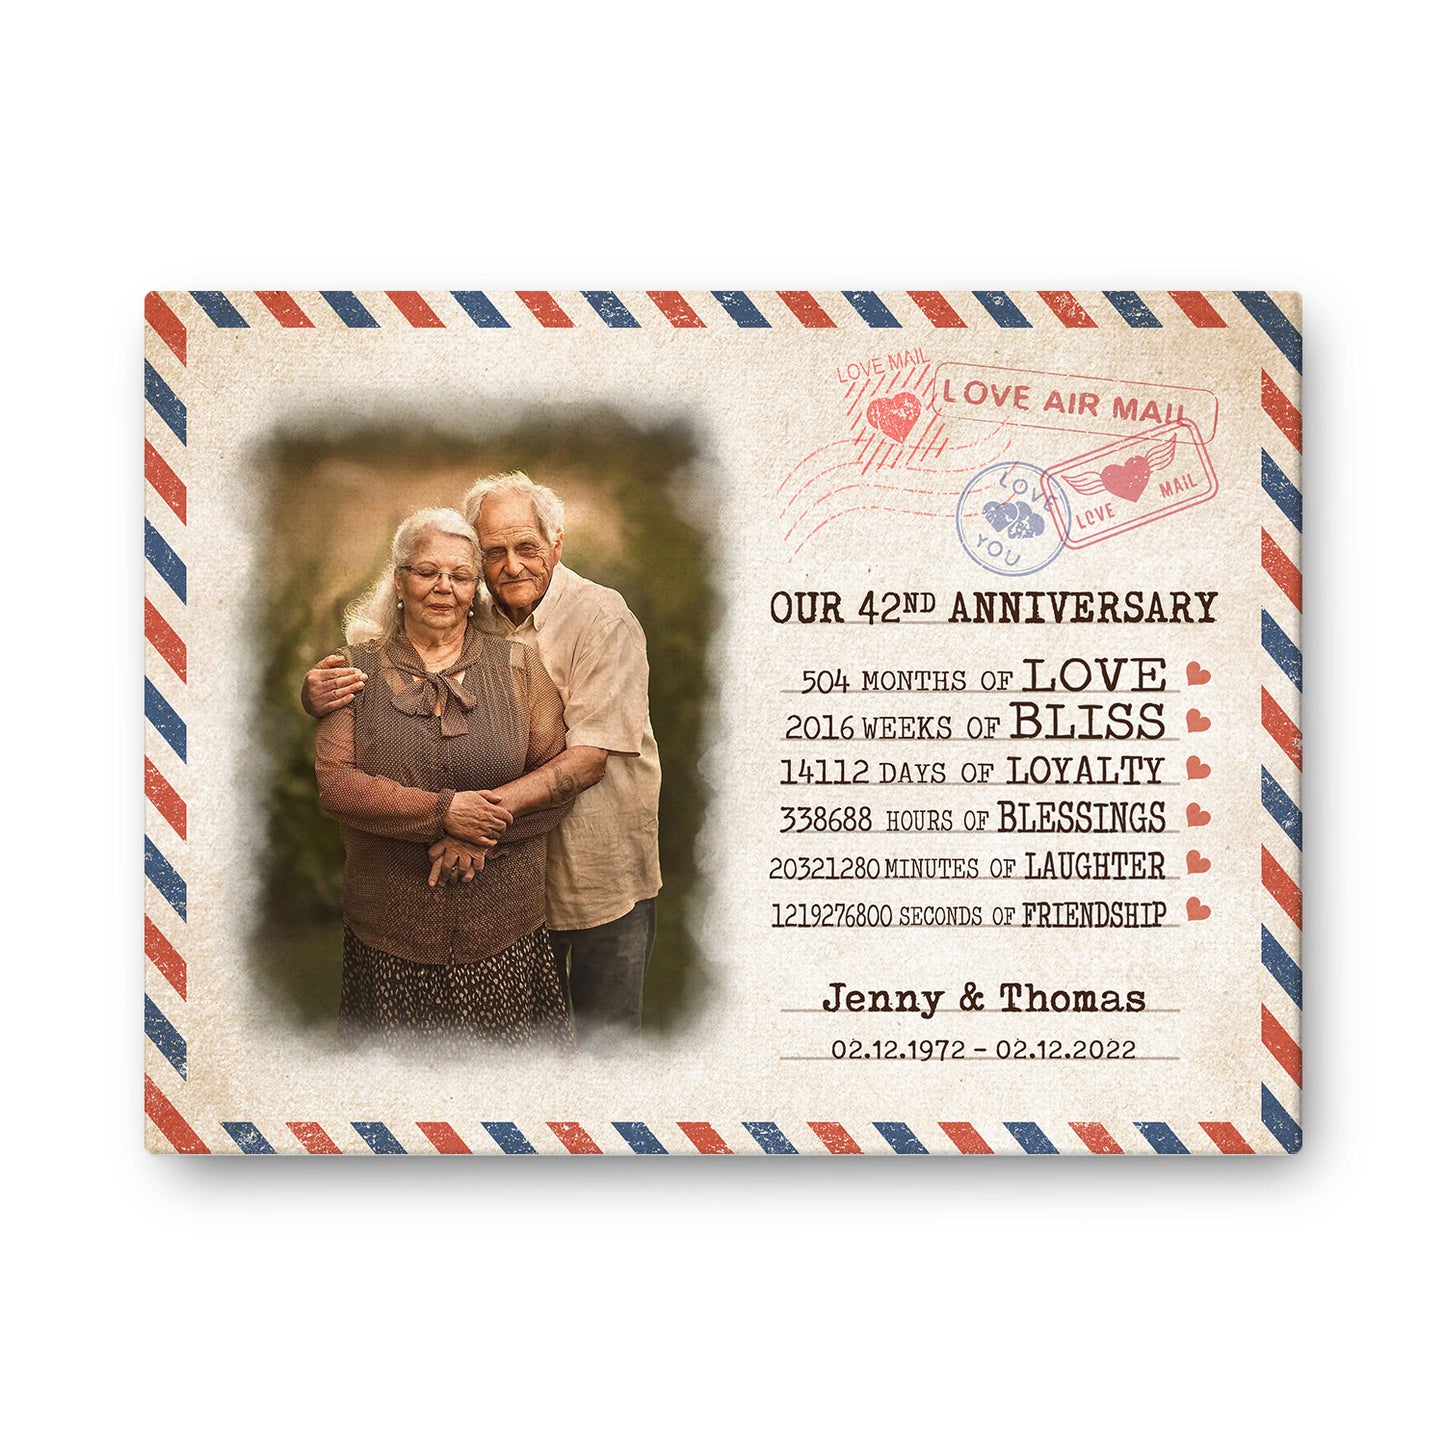 Our 42nd Anniversary Letter Valentine Gift Personalized Canvas